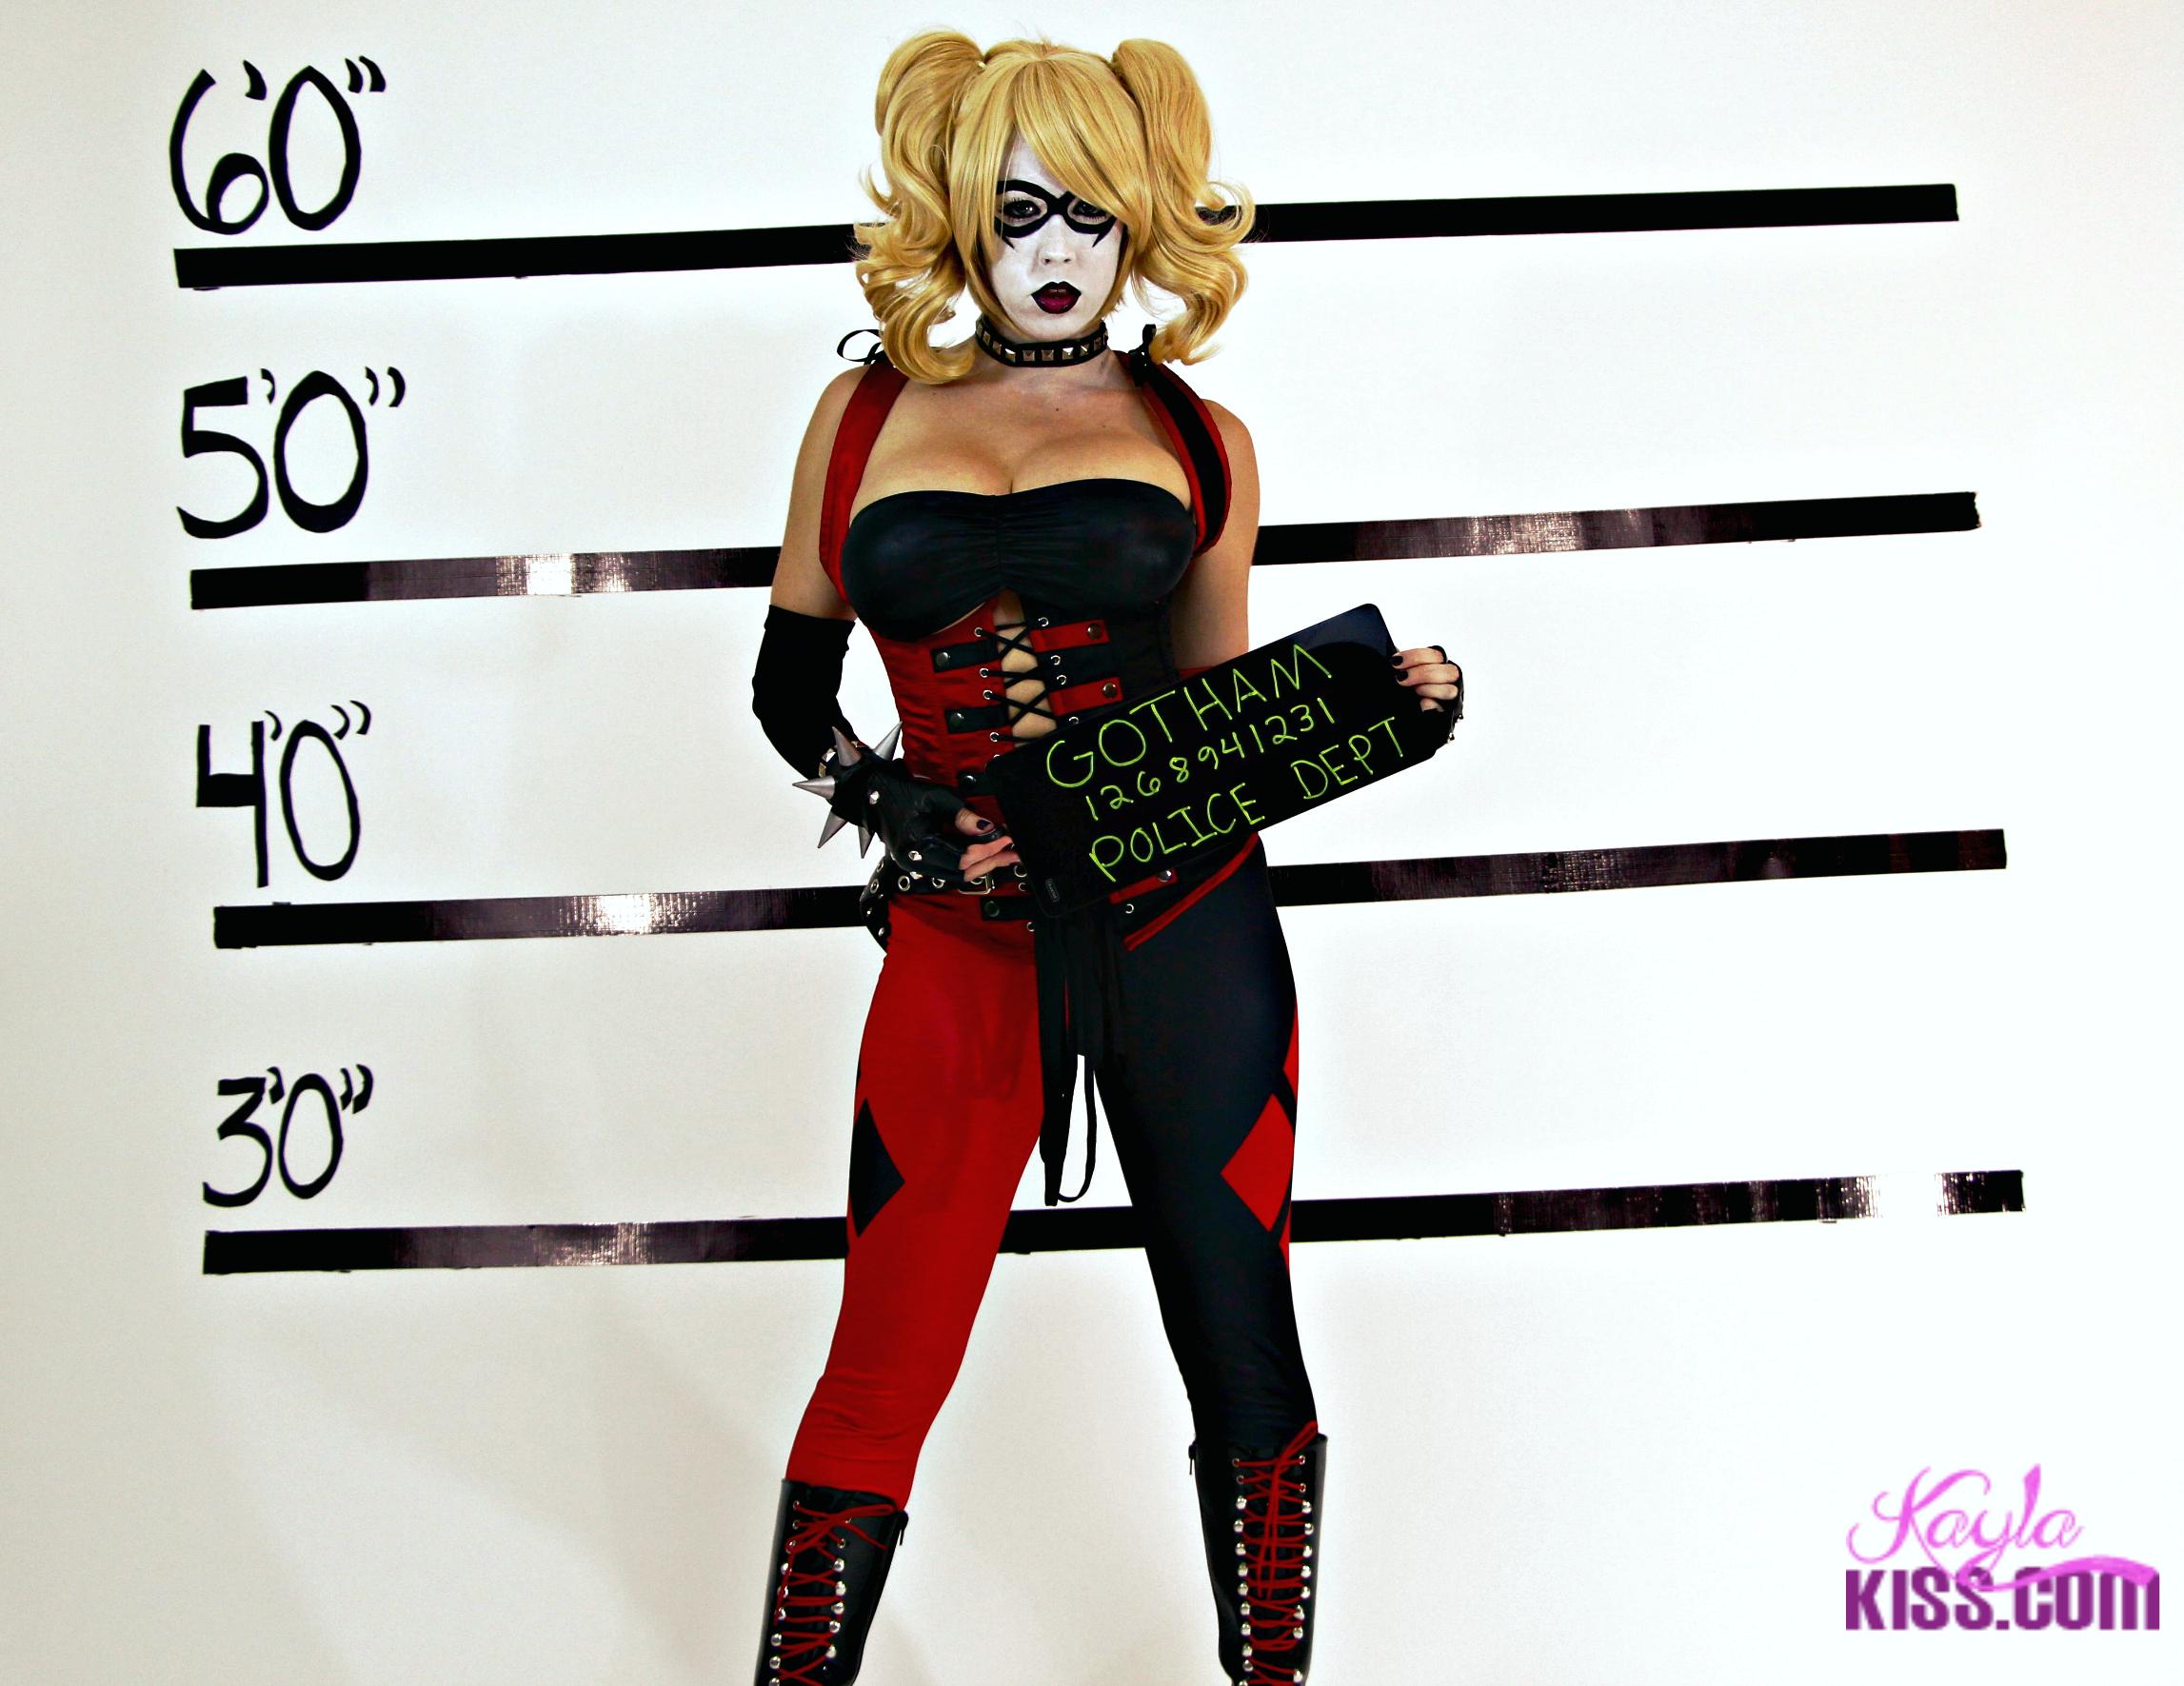 Busty Hottie Kayla Kiss Dresses Up As Harley Quinn For You